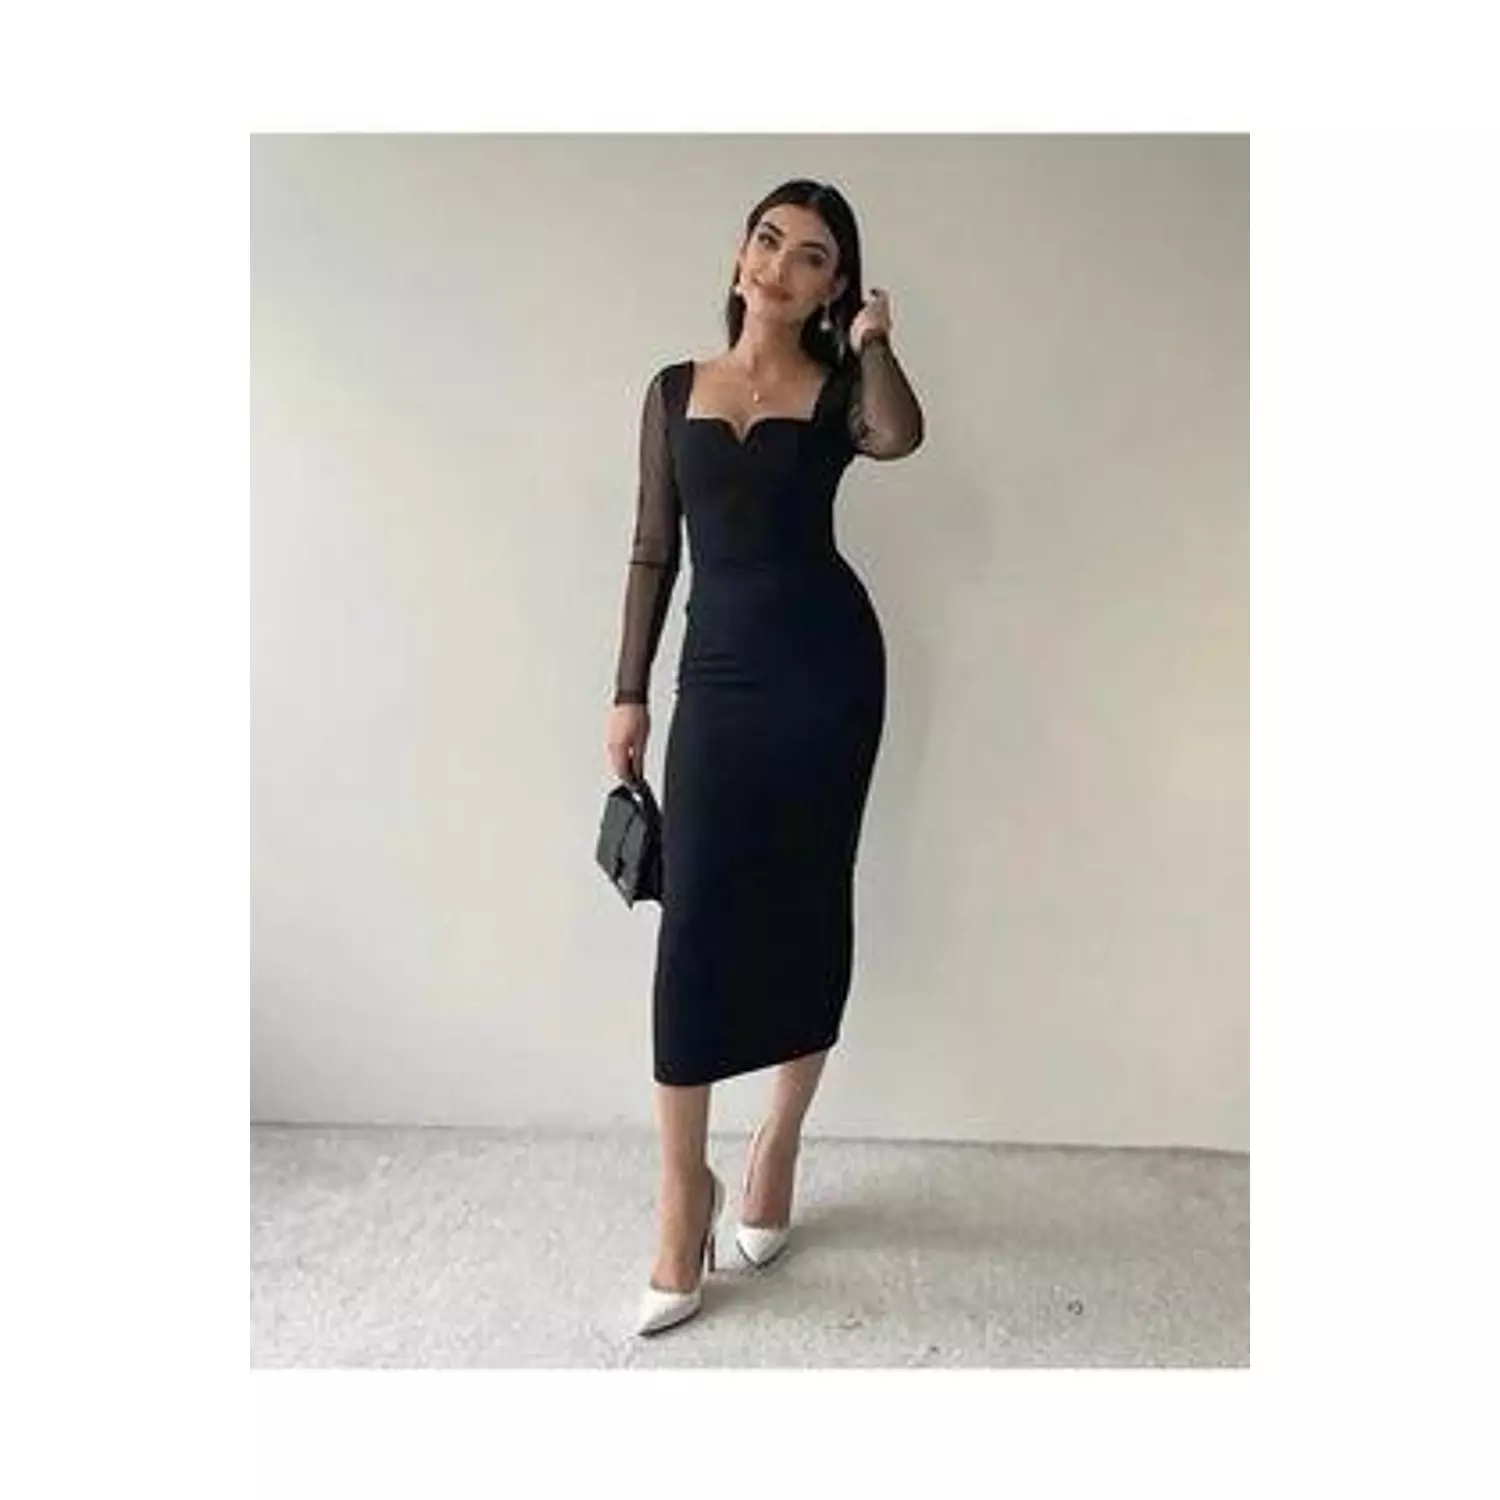 Tulle Detailed Romantic Black Pencil Dress hover image